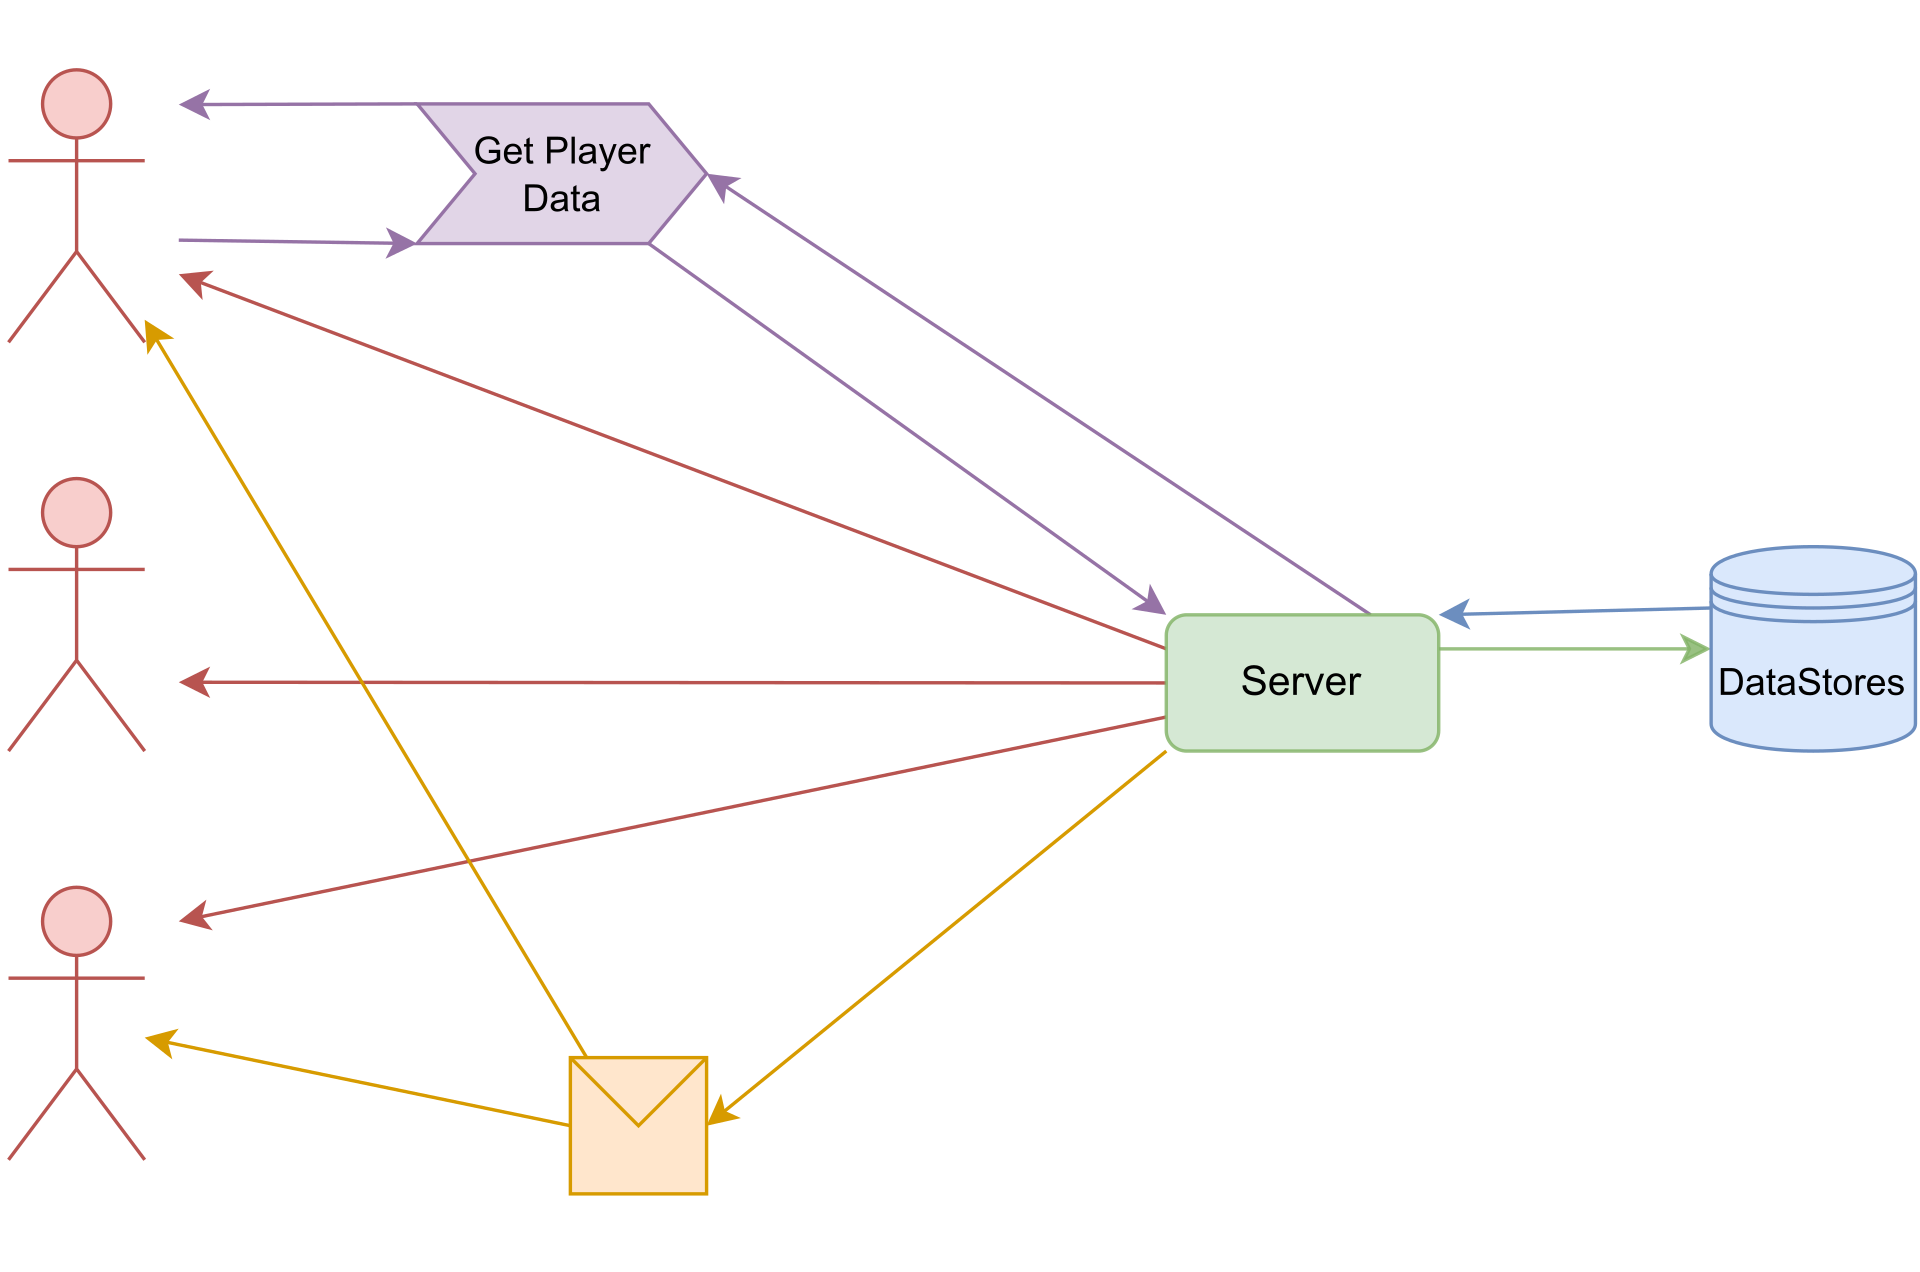 A diagram showing the server-client architecture of the game.